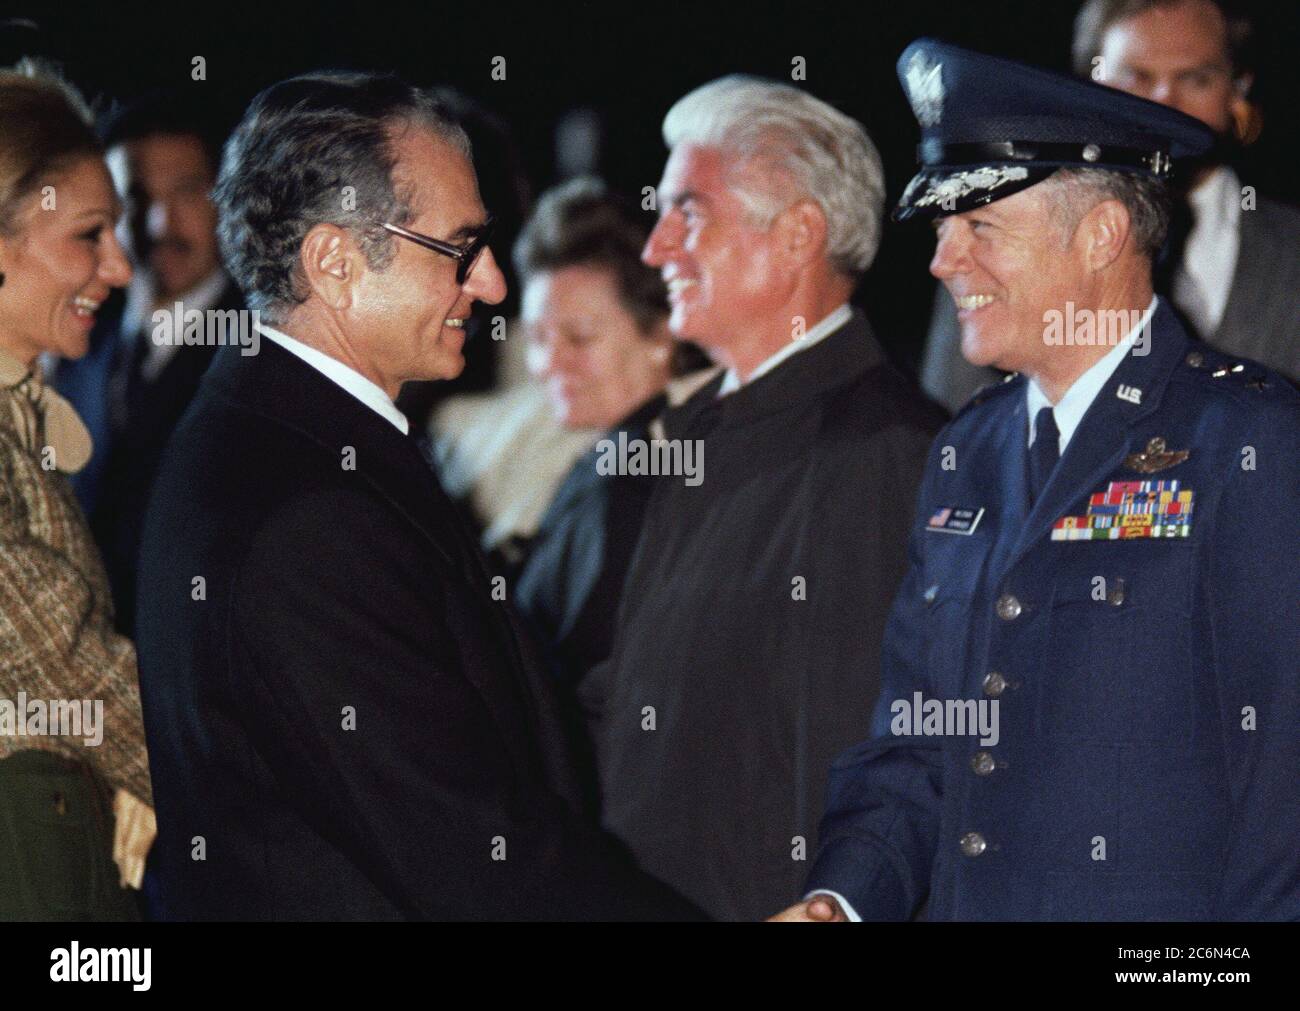 1977 - Mohammed Reza Pahlavi, Shah of Iran, shakes hands with a US Air Force general officer prior to his departure from the United States. Stock Photo